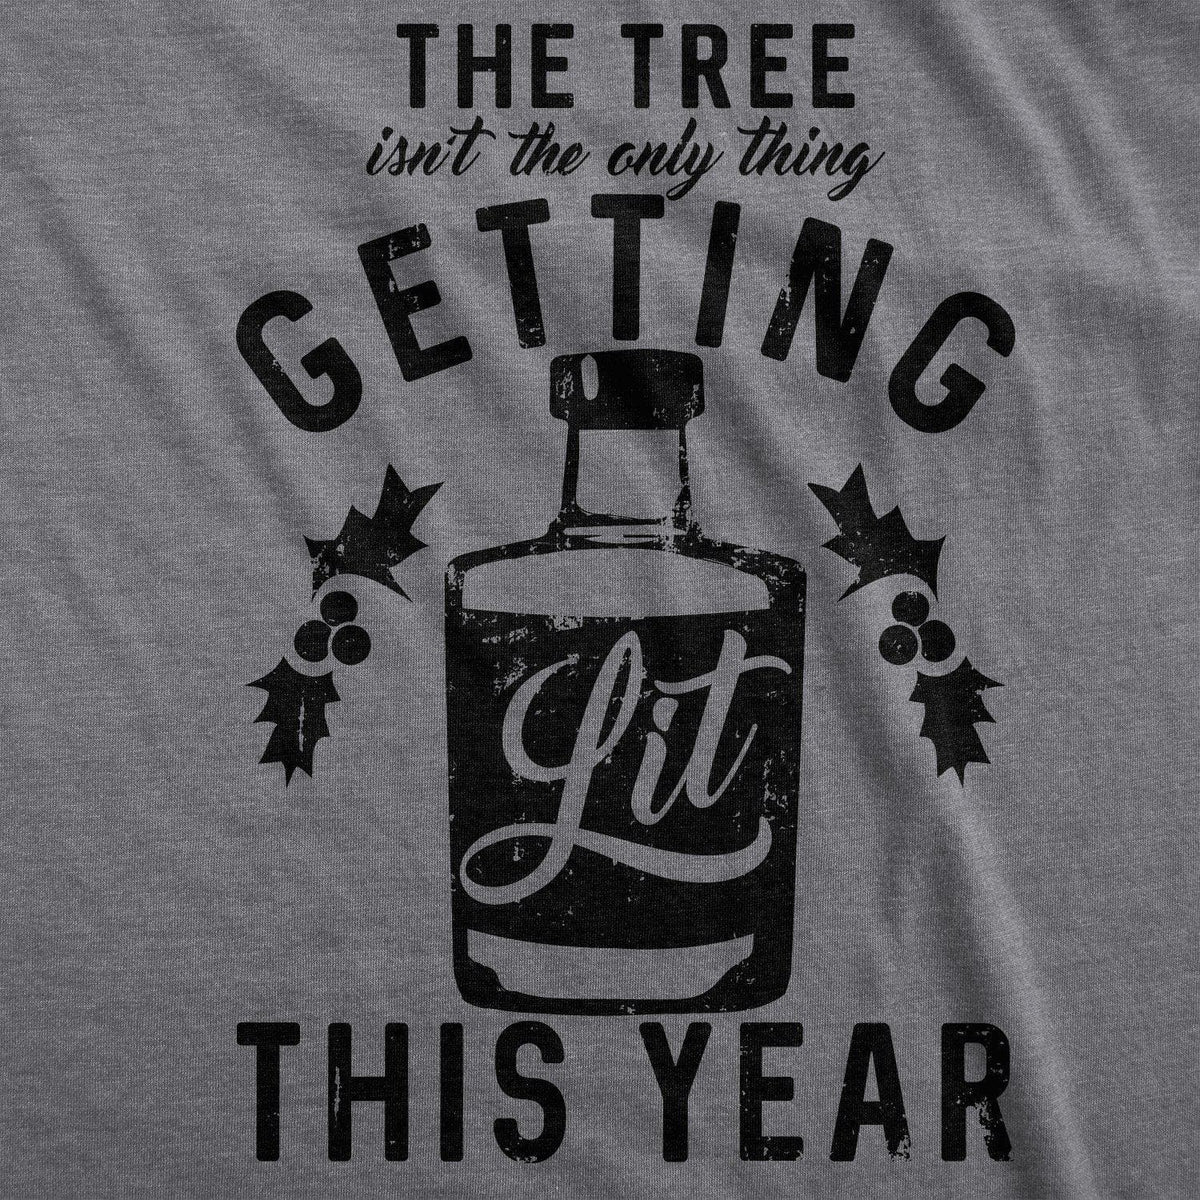 The Tree Isn’t The Only Thing Getting Lit This Year Men&#39;s Tshirt - Crazy Dog T-Shirts